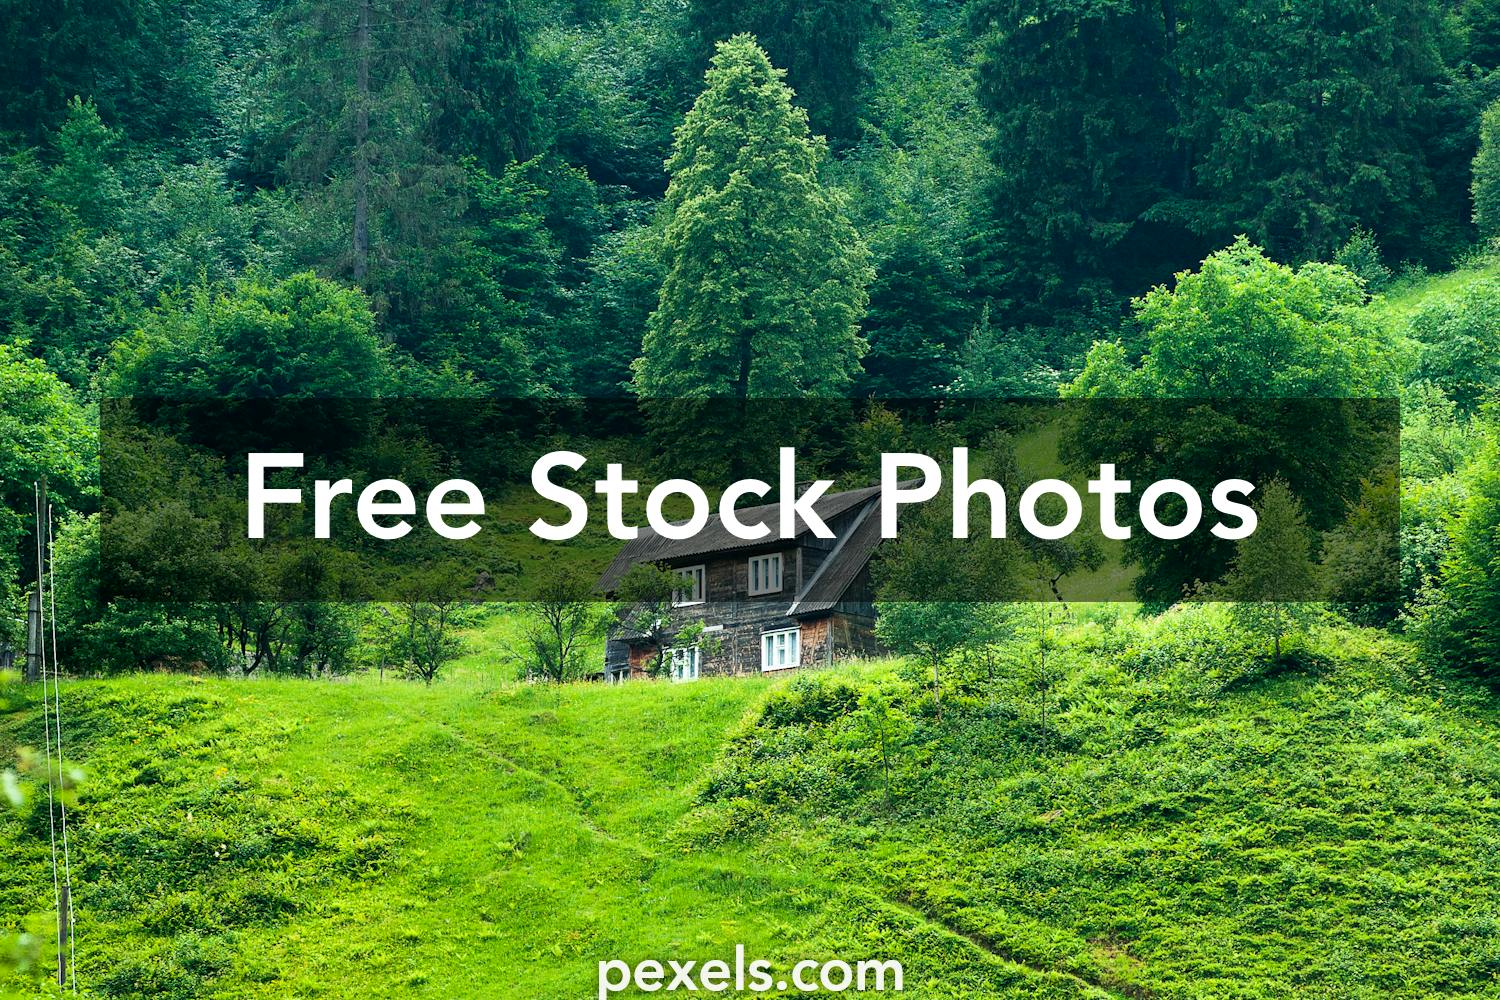 Green Nature Photos, Download The BEST Free Green Nature Stock Photos & HD  Images